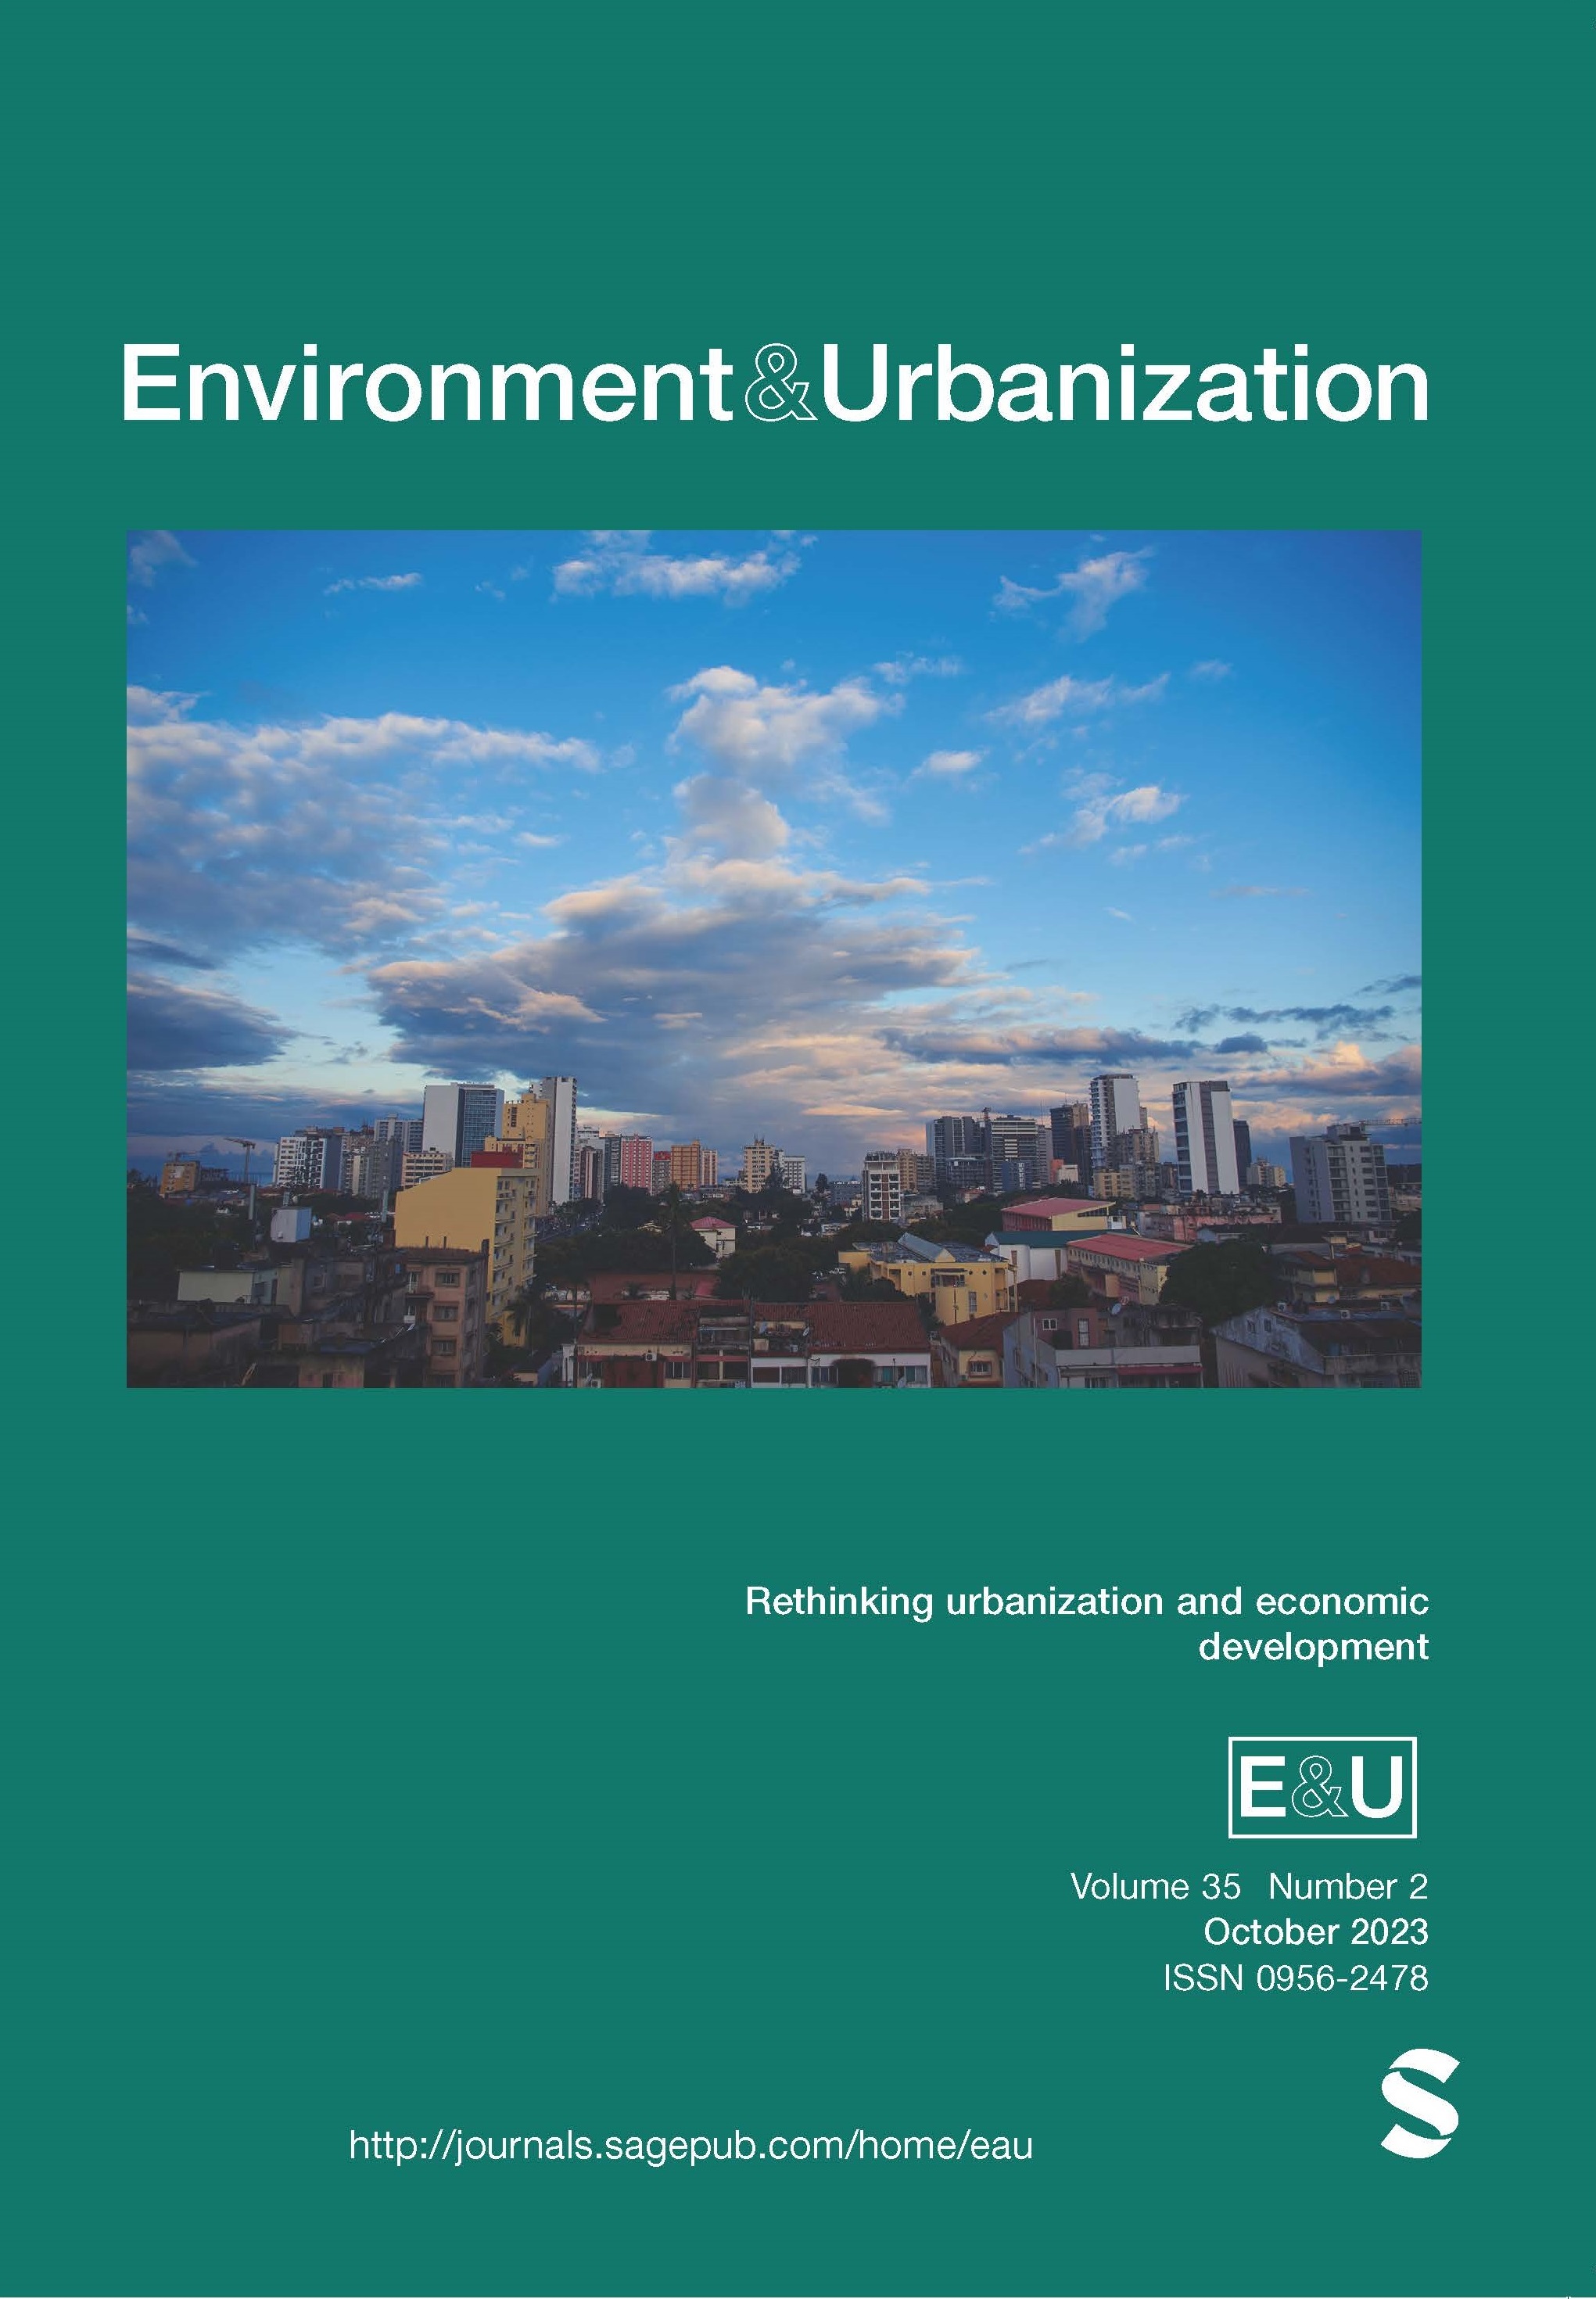 Environment and Urbanization Vol 35 Issue 2 cover